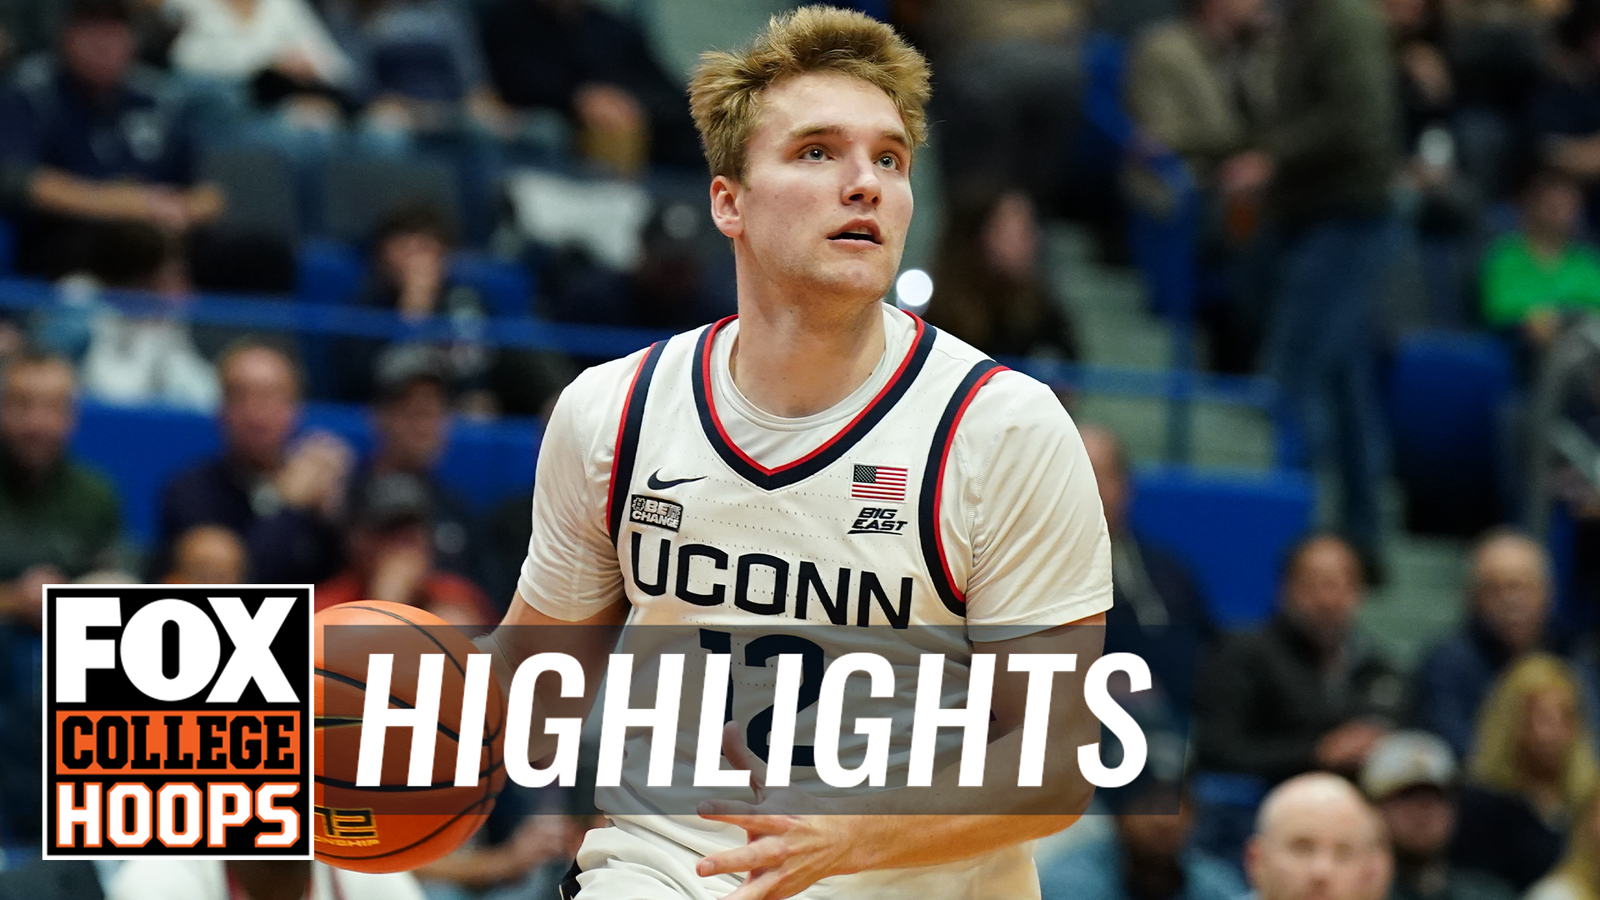 Cam Spencer scores a career-high 25 points, with seven 3-pointers to help UConn defeat MS Valley